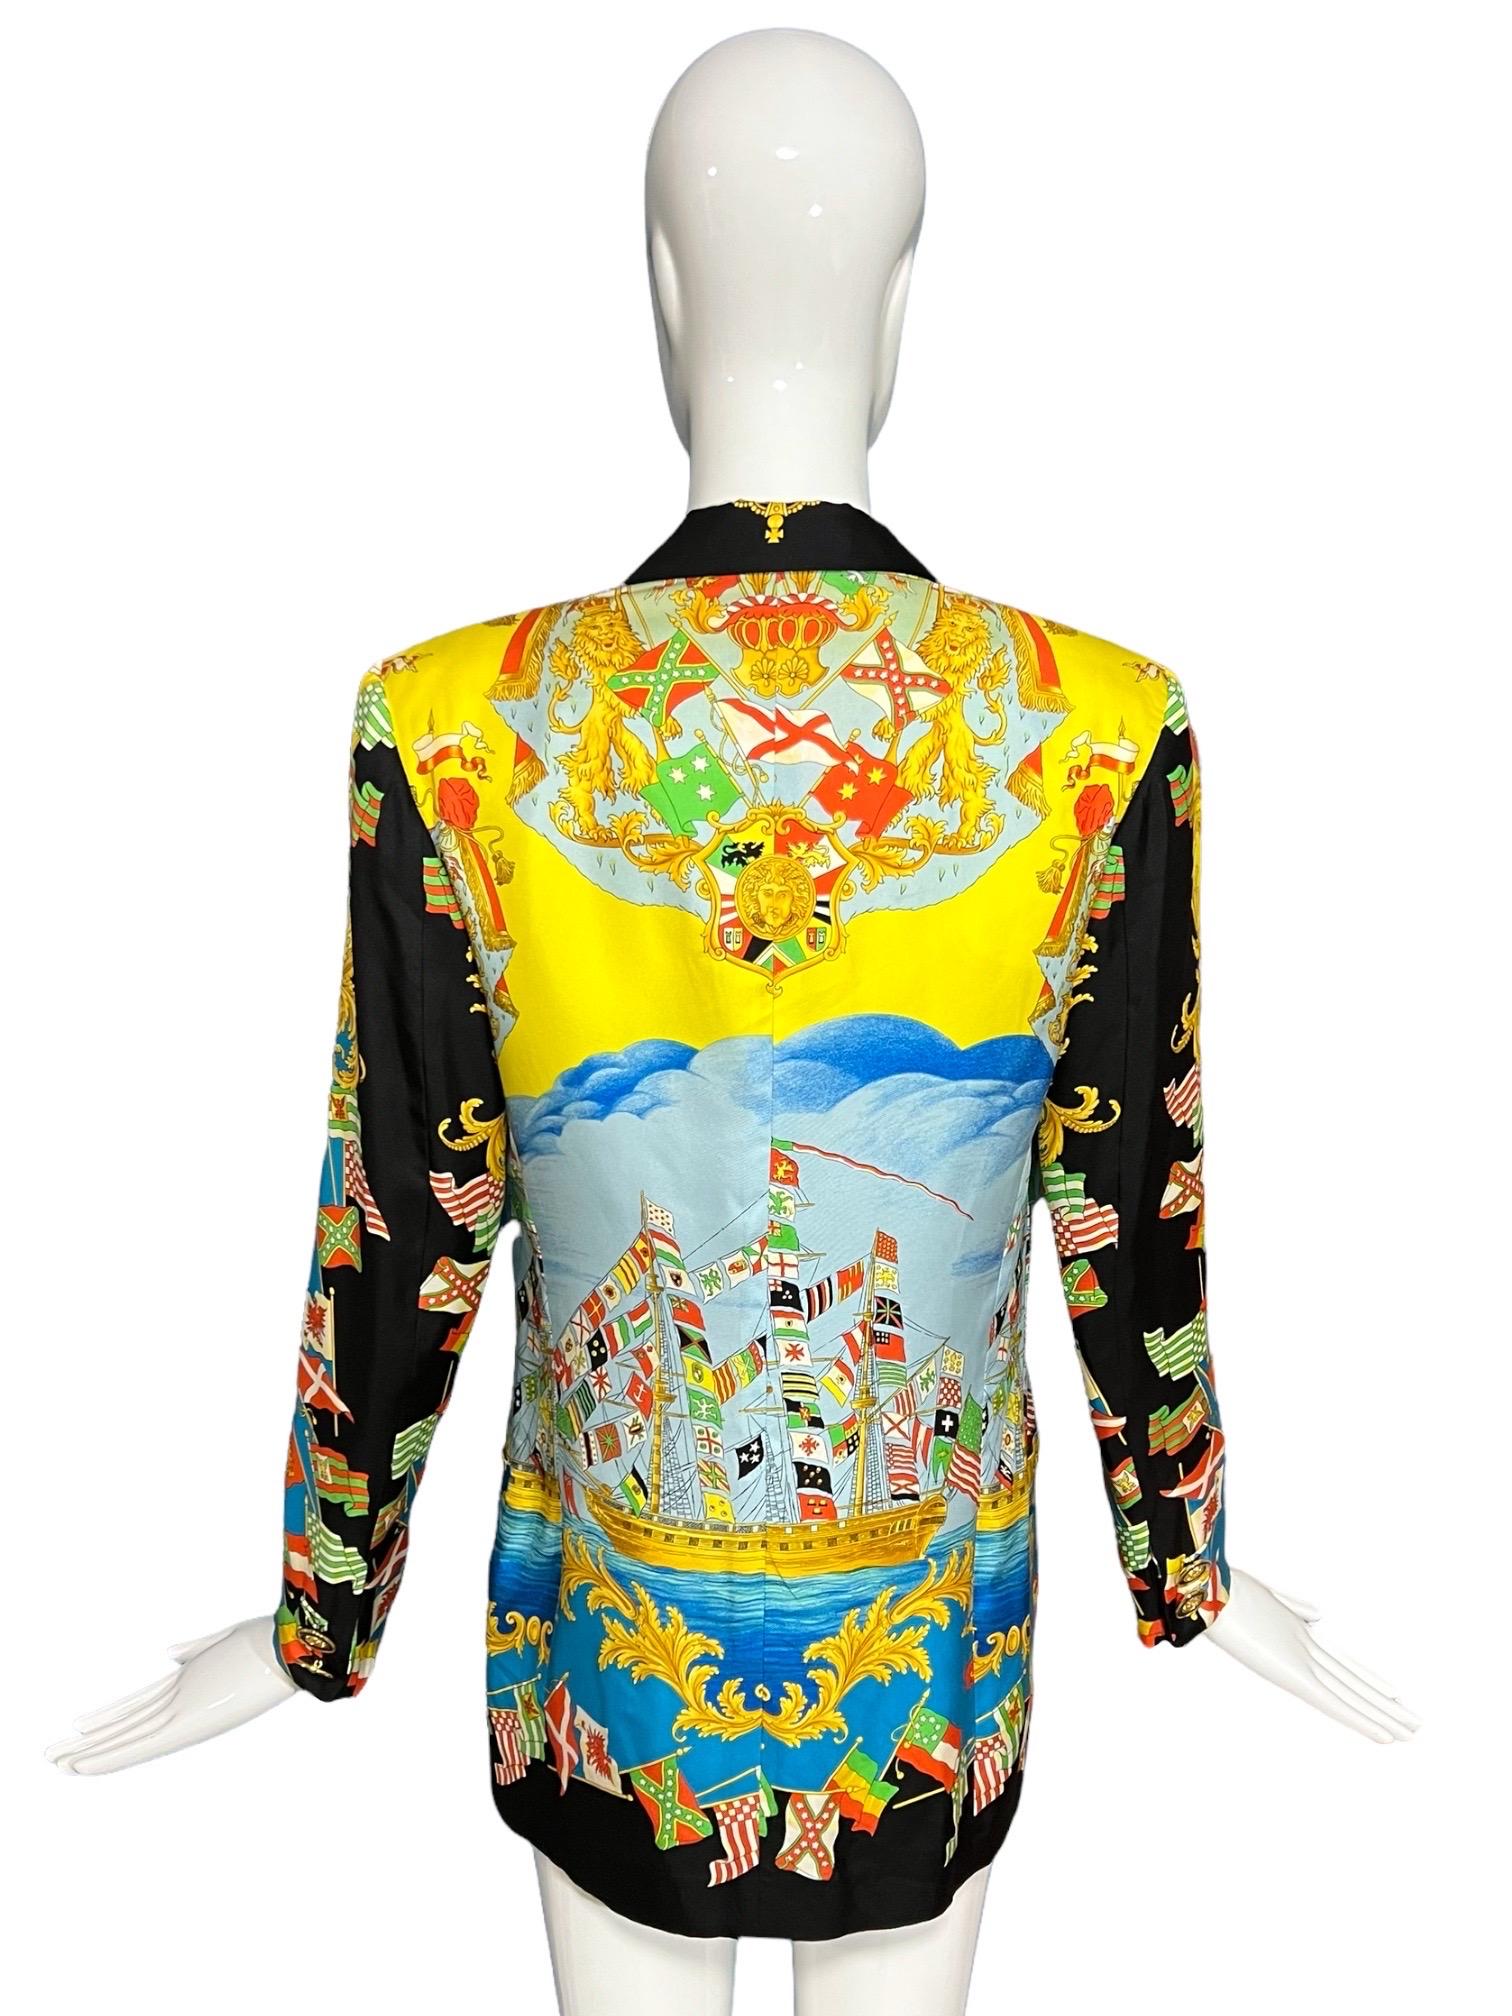 S/S 1993 Gianni Versace Baroque Flags Silk Blazer Jacket Miami Collection  For Sale 3